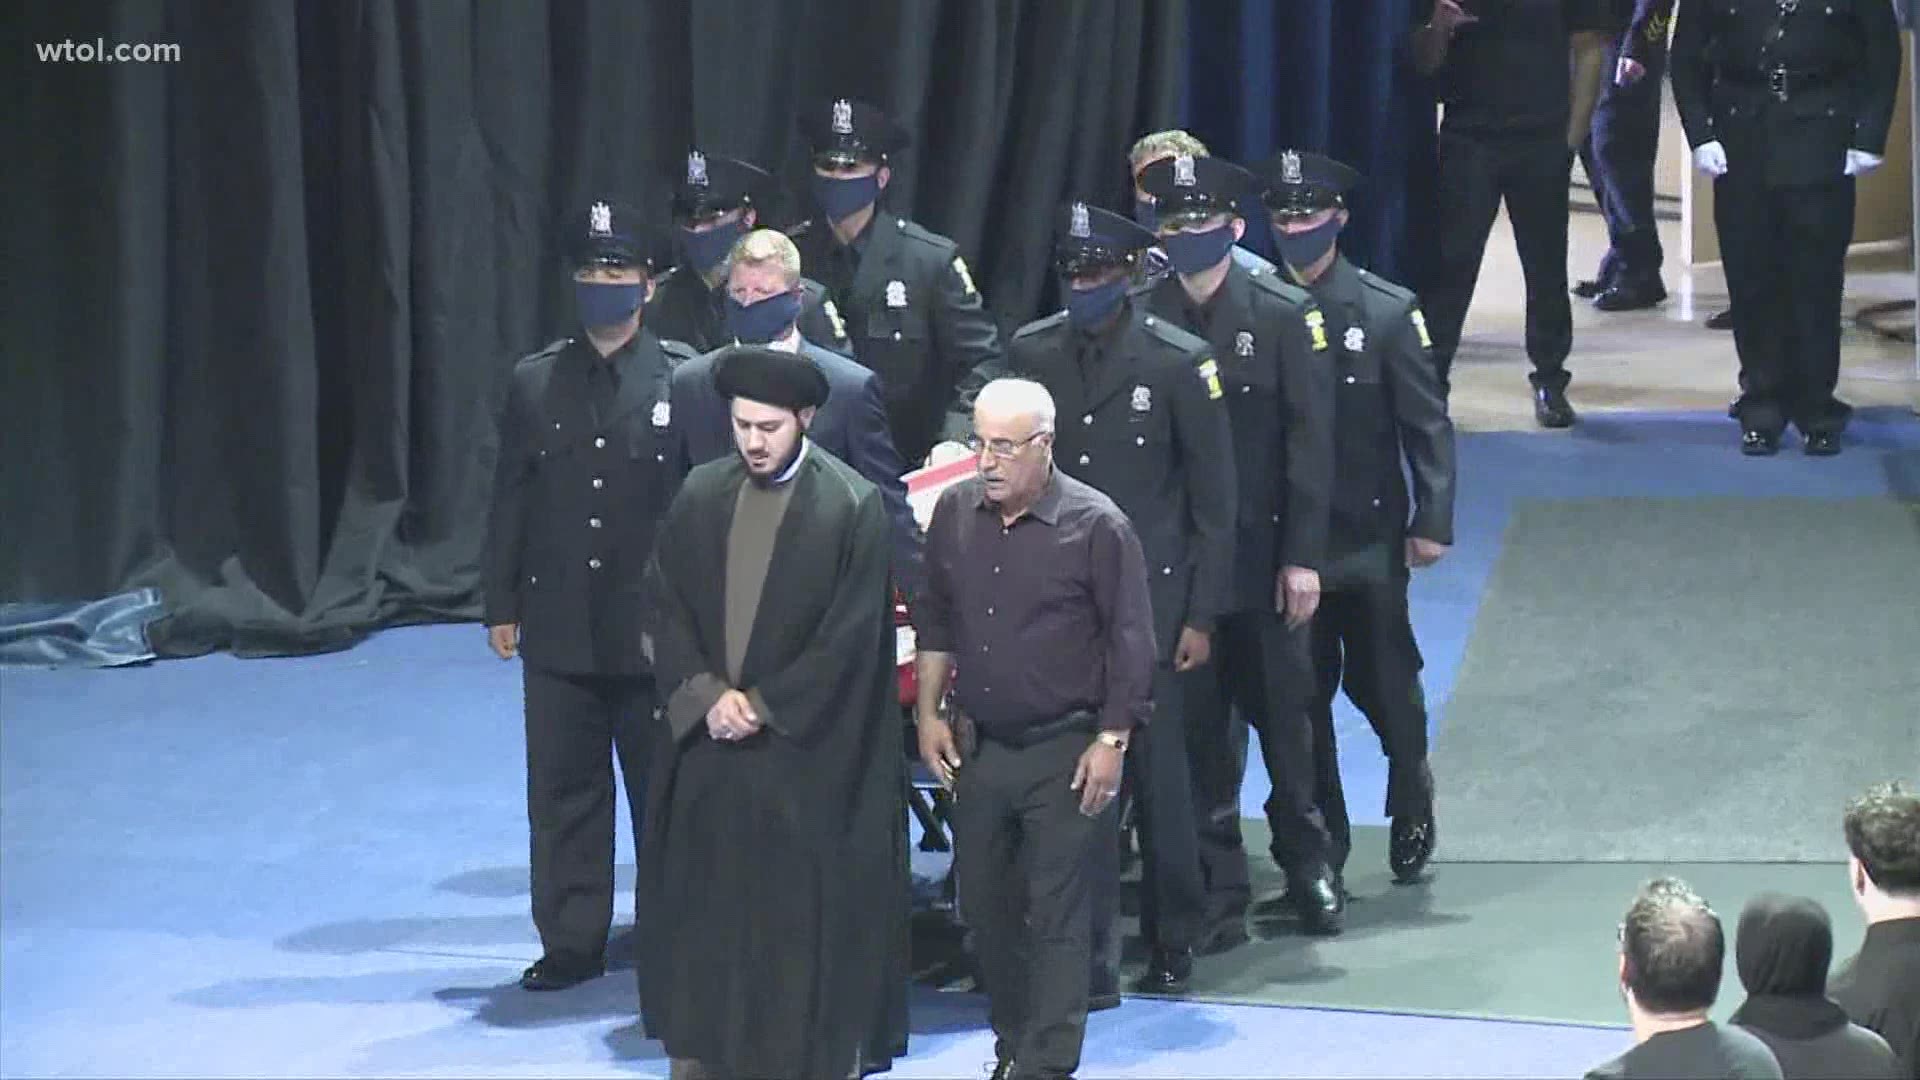 After the death of officer Anthony Dia, many have been wondering about the Islamic funeral rituals.